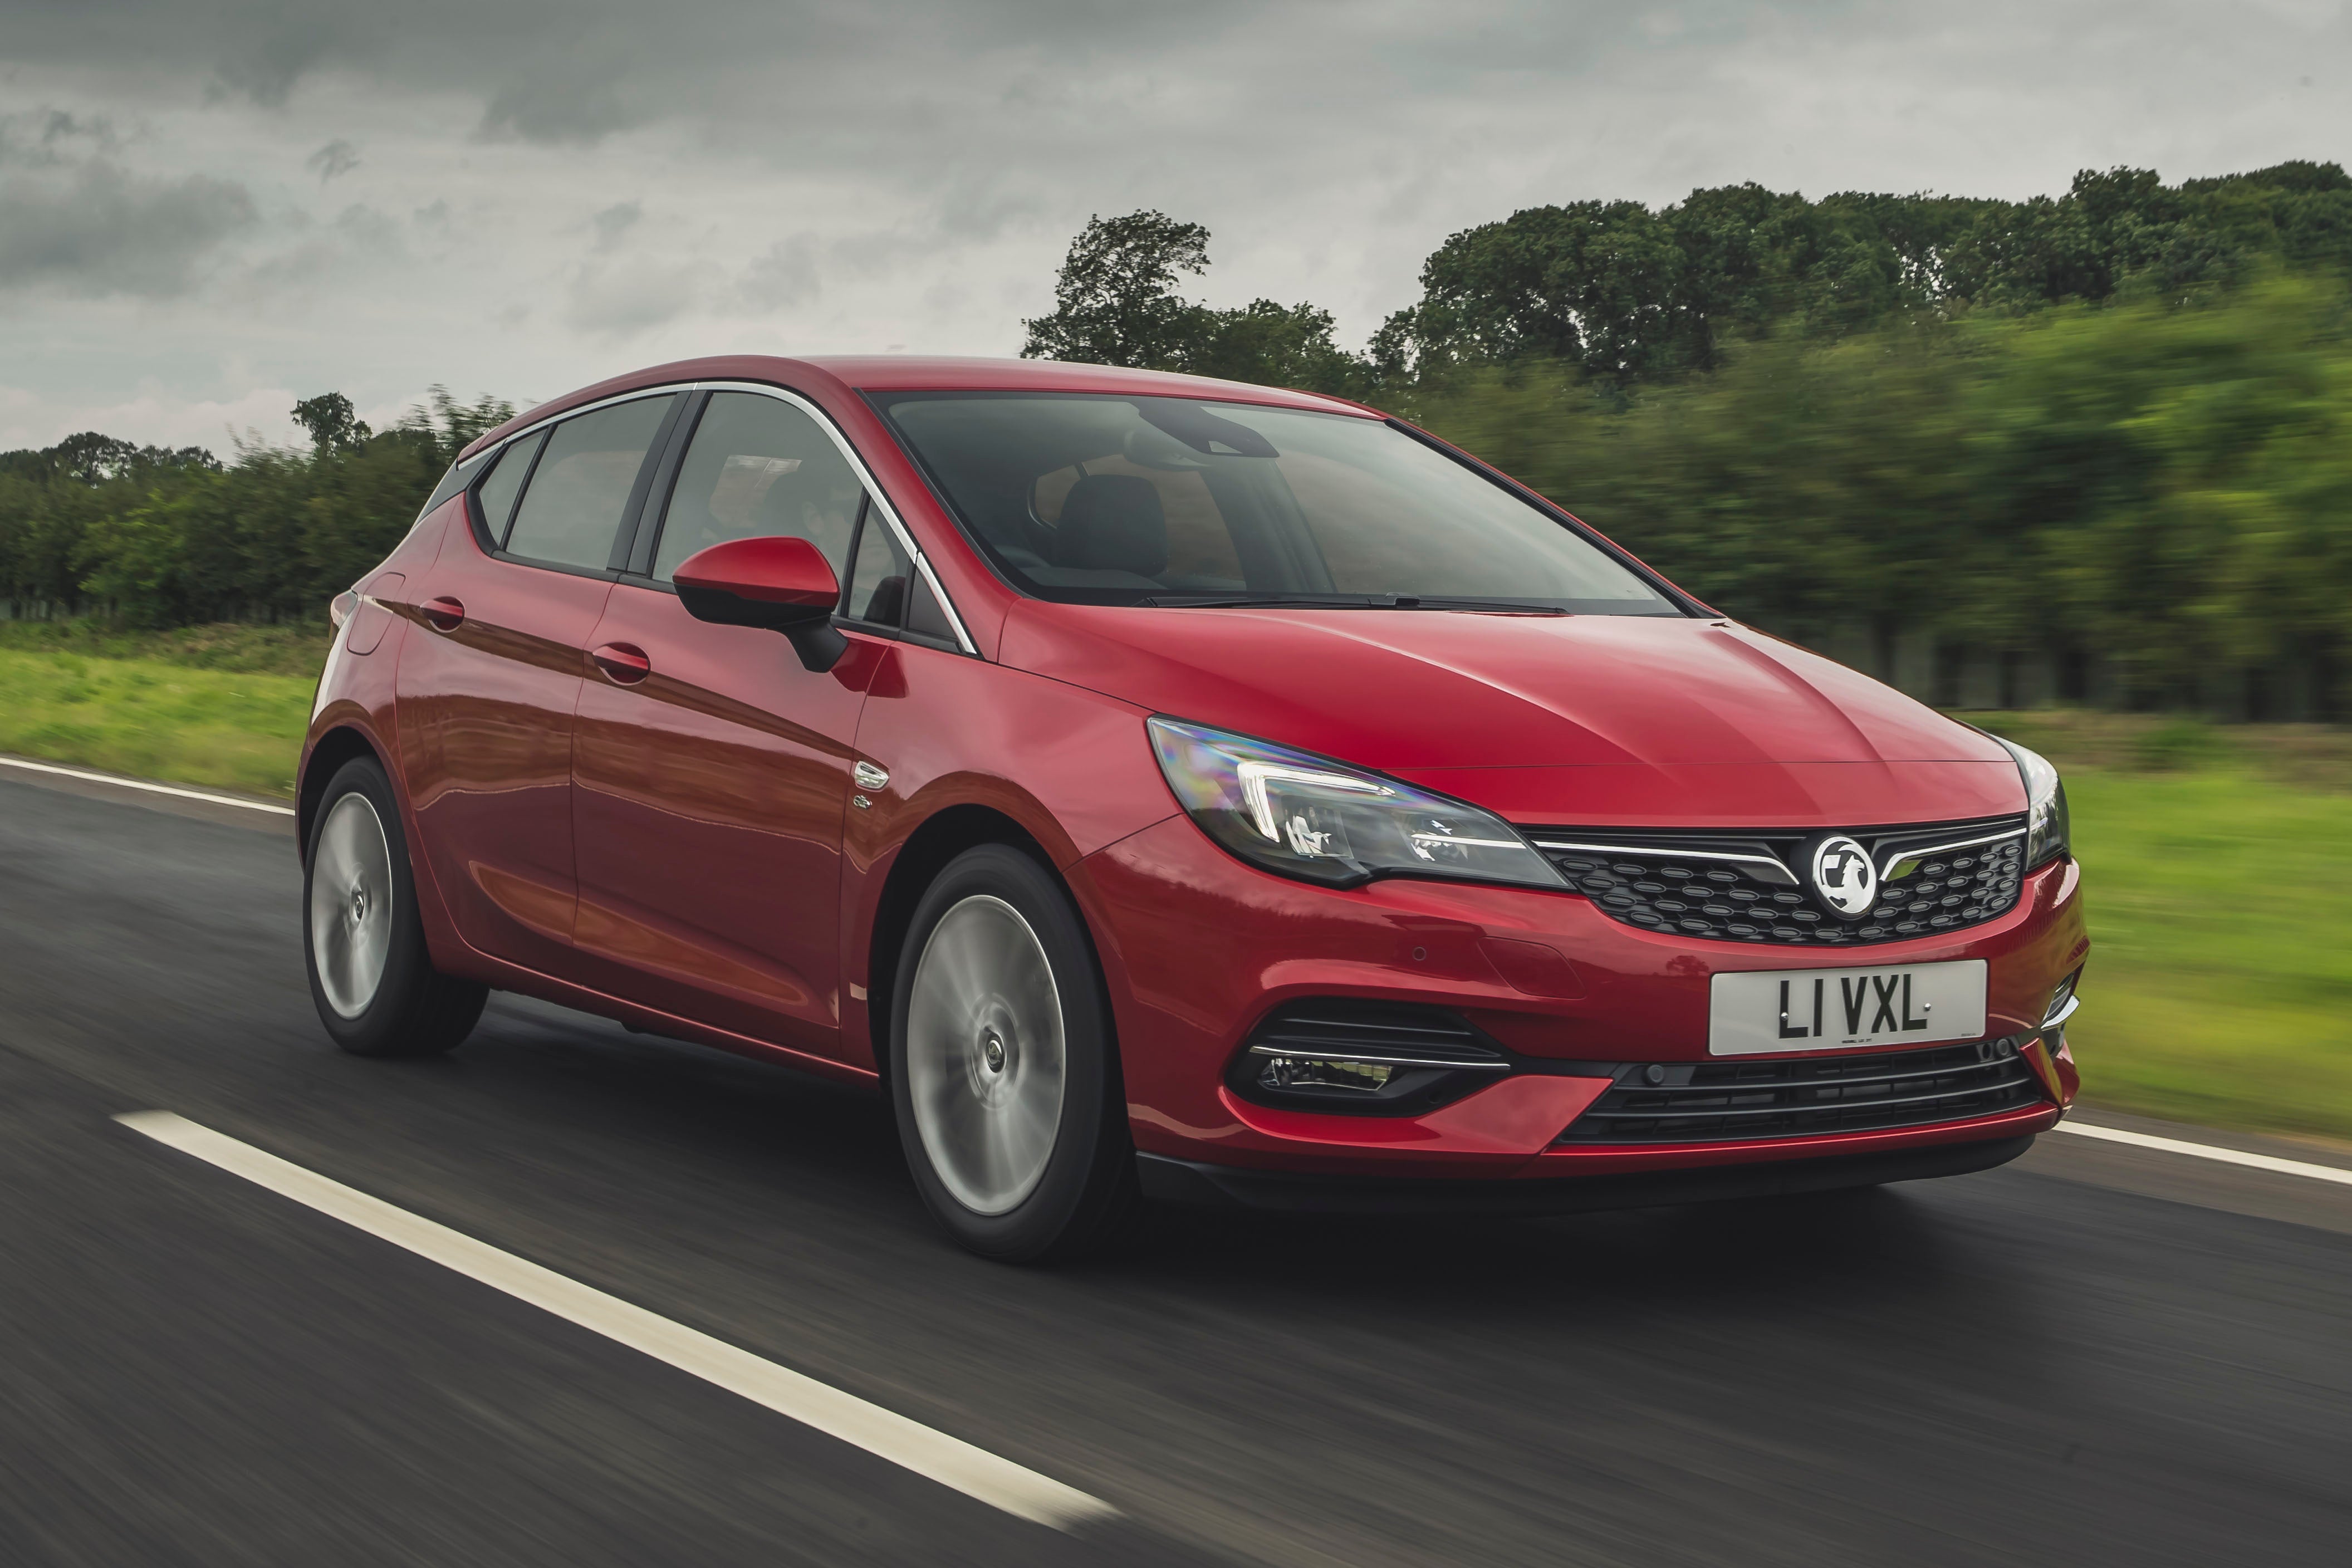 Used Vauxhall Astra (2015 - 2023) Review: Front Side View